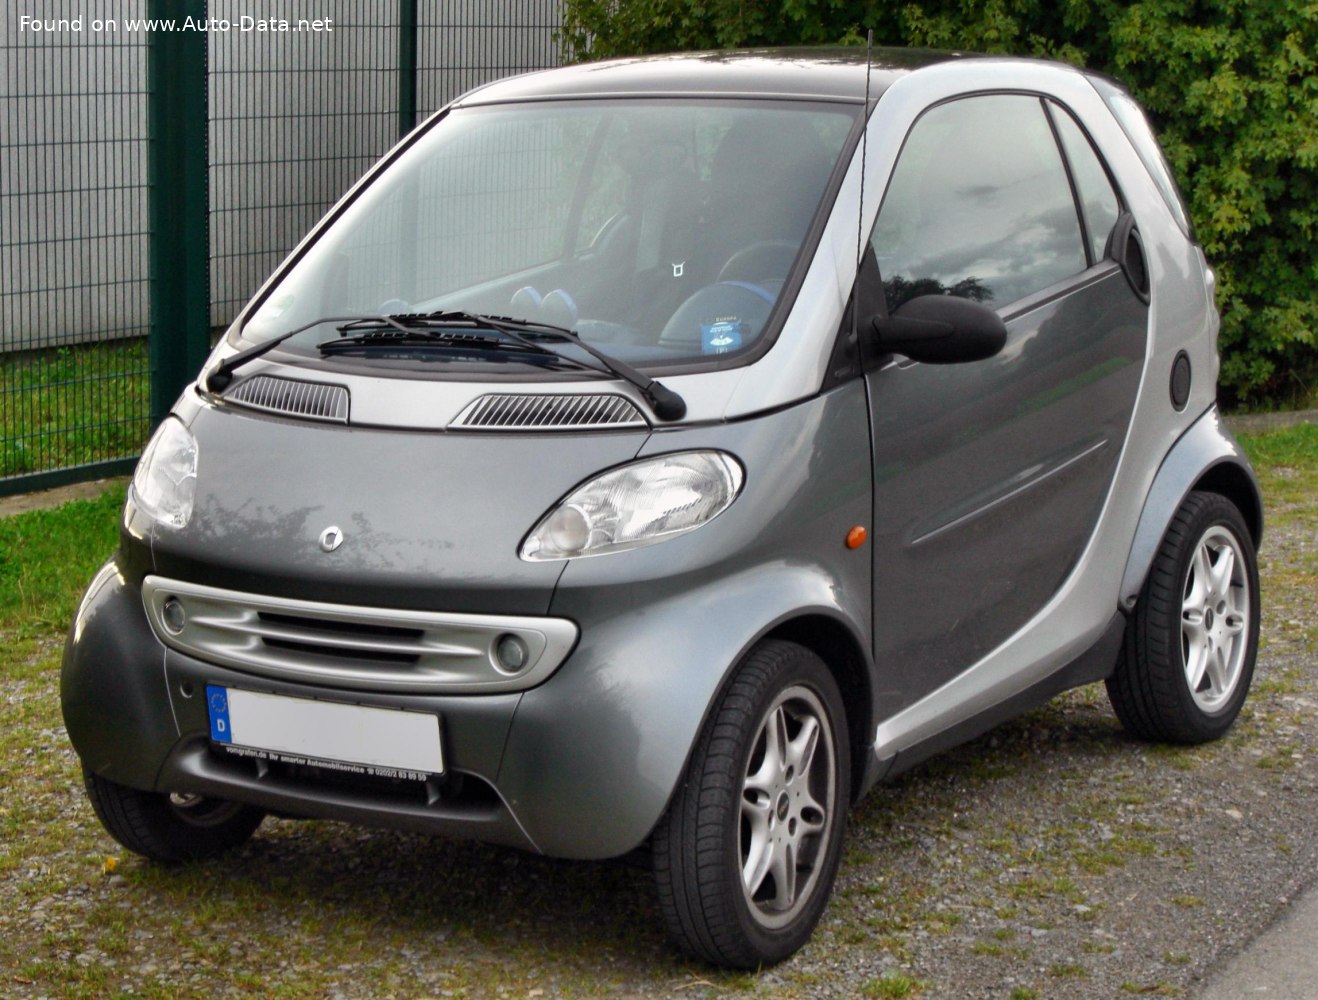 1998 Smart Fortwo Coupe (C450) 0.6i (45 Hp) | Technical specs, data, fuel consumption, Dimensions